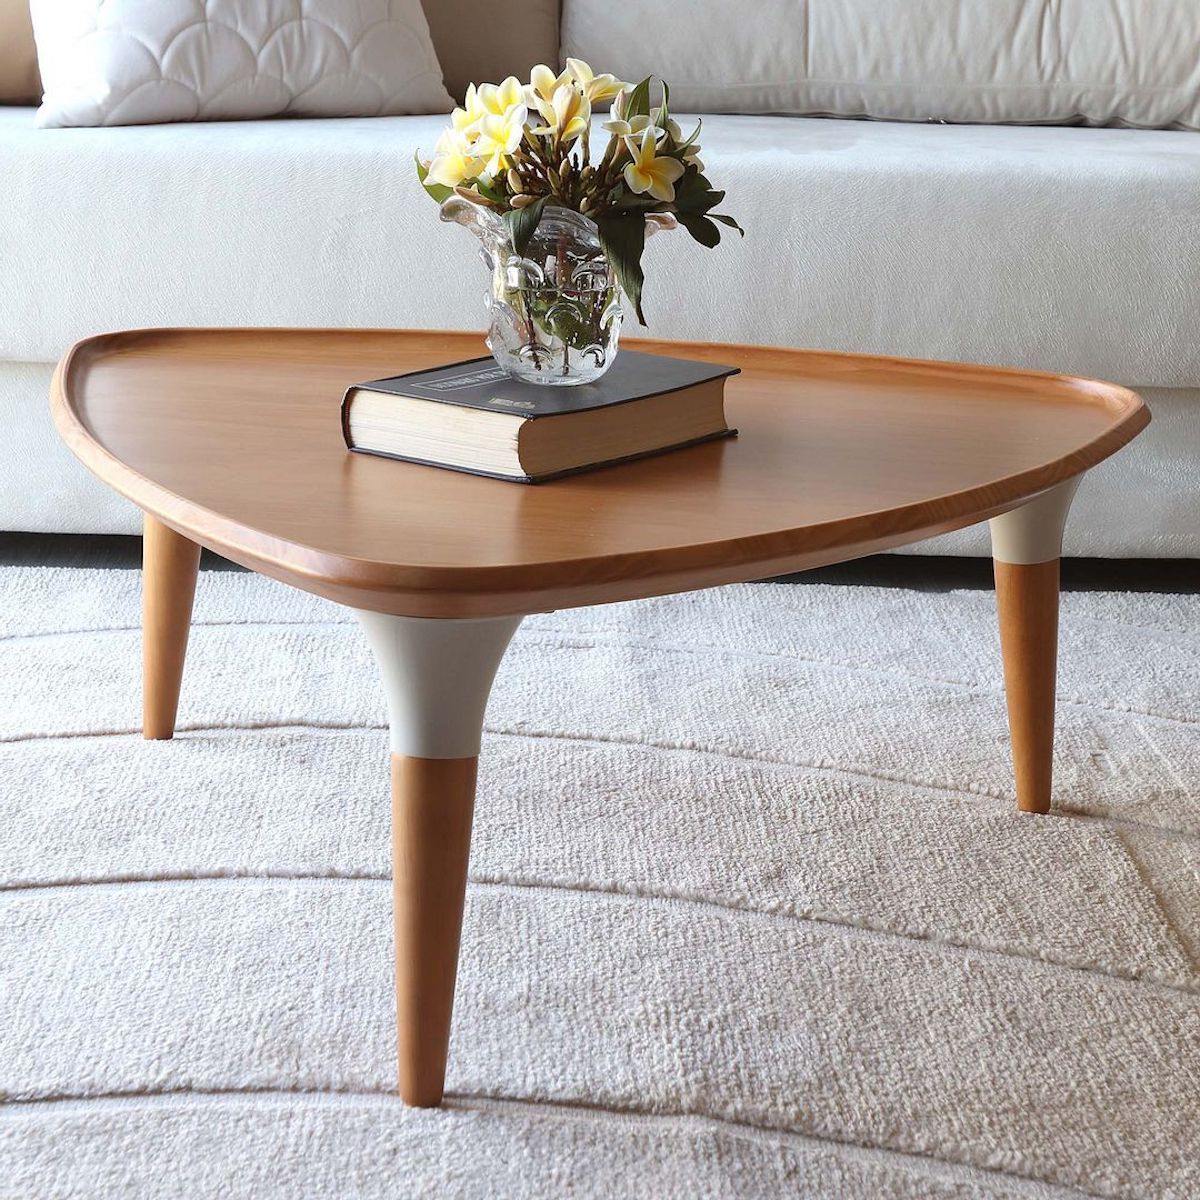 Manhattan Comfort HomeDock Triangle Coffee Table in Cinnamon and Off White 253451 in Living Room